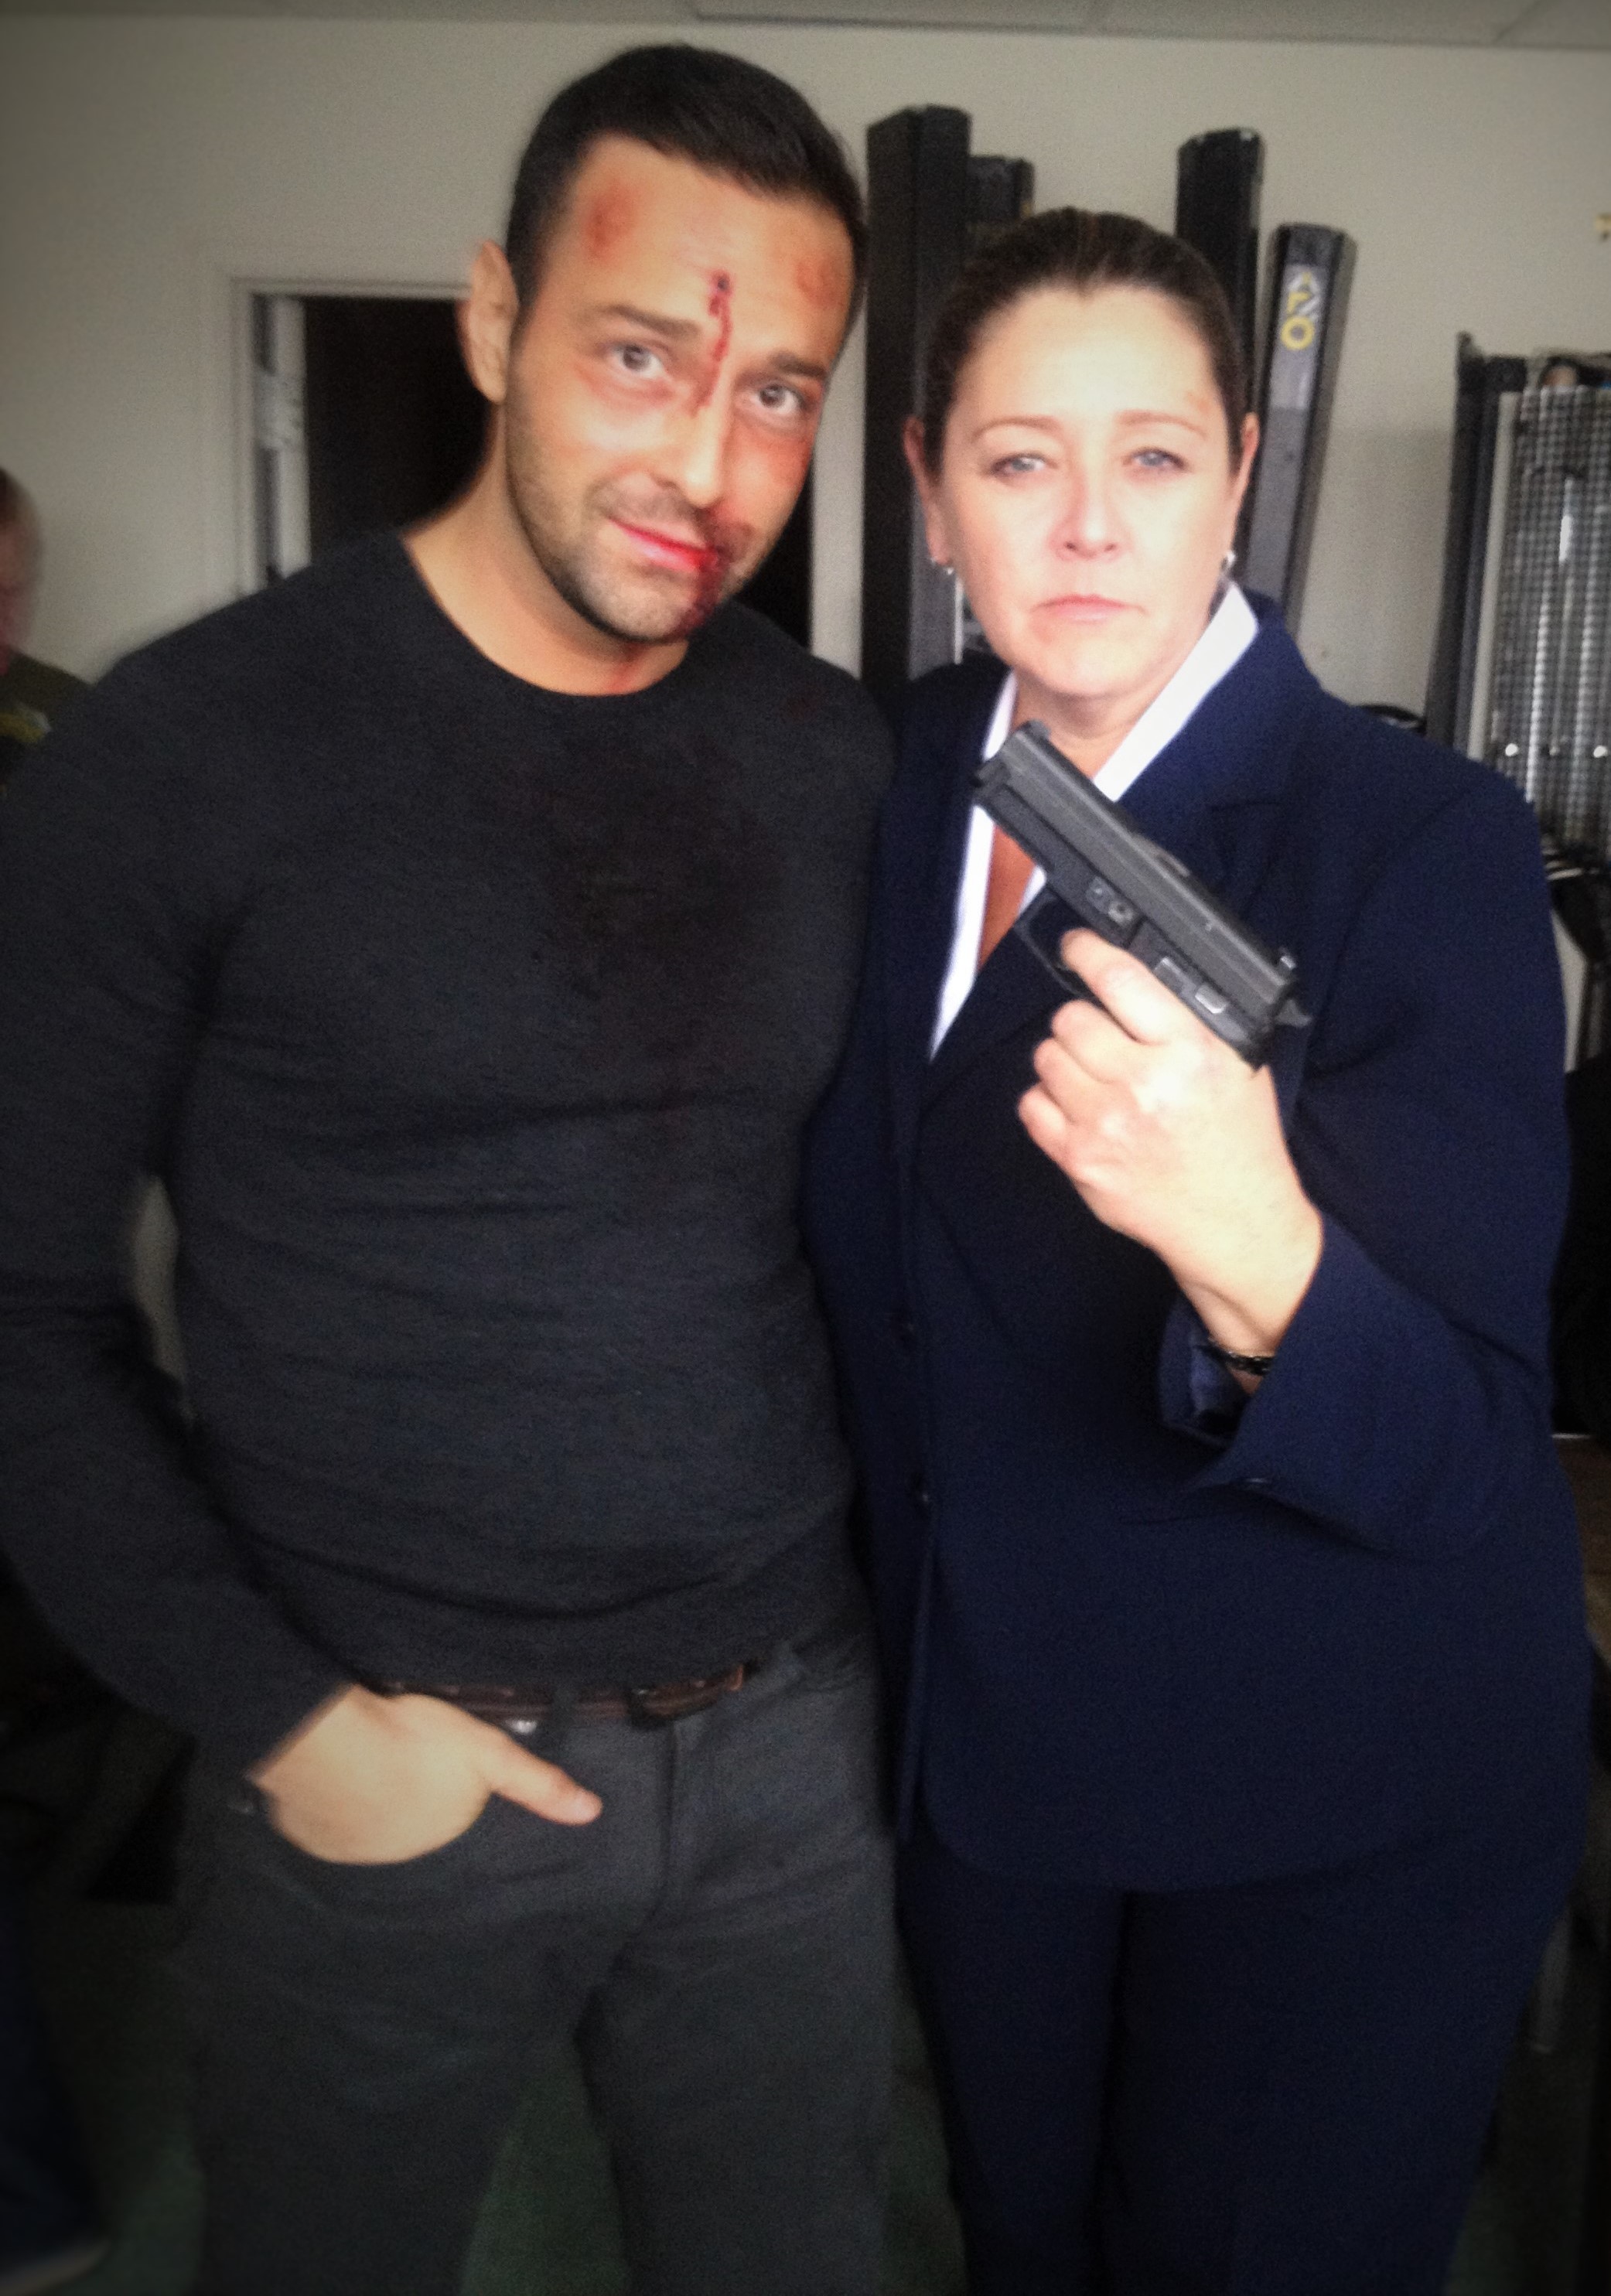 After shooting scenes on Person of Interest. Getting a bullet to the dome my Camryn Manheim...she's one bad ass chica!